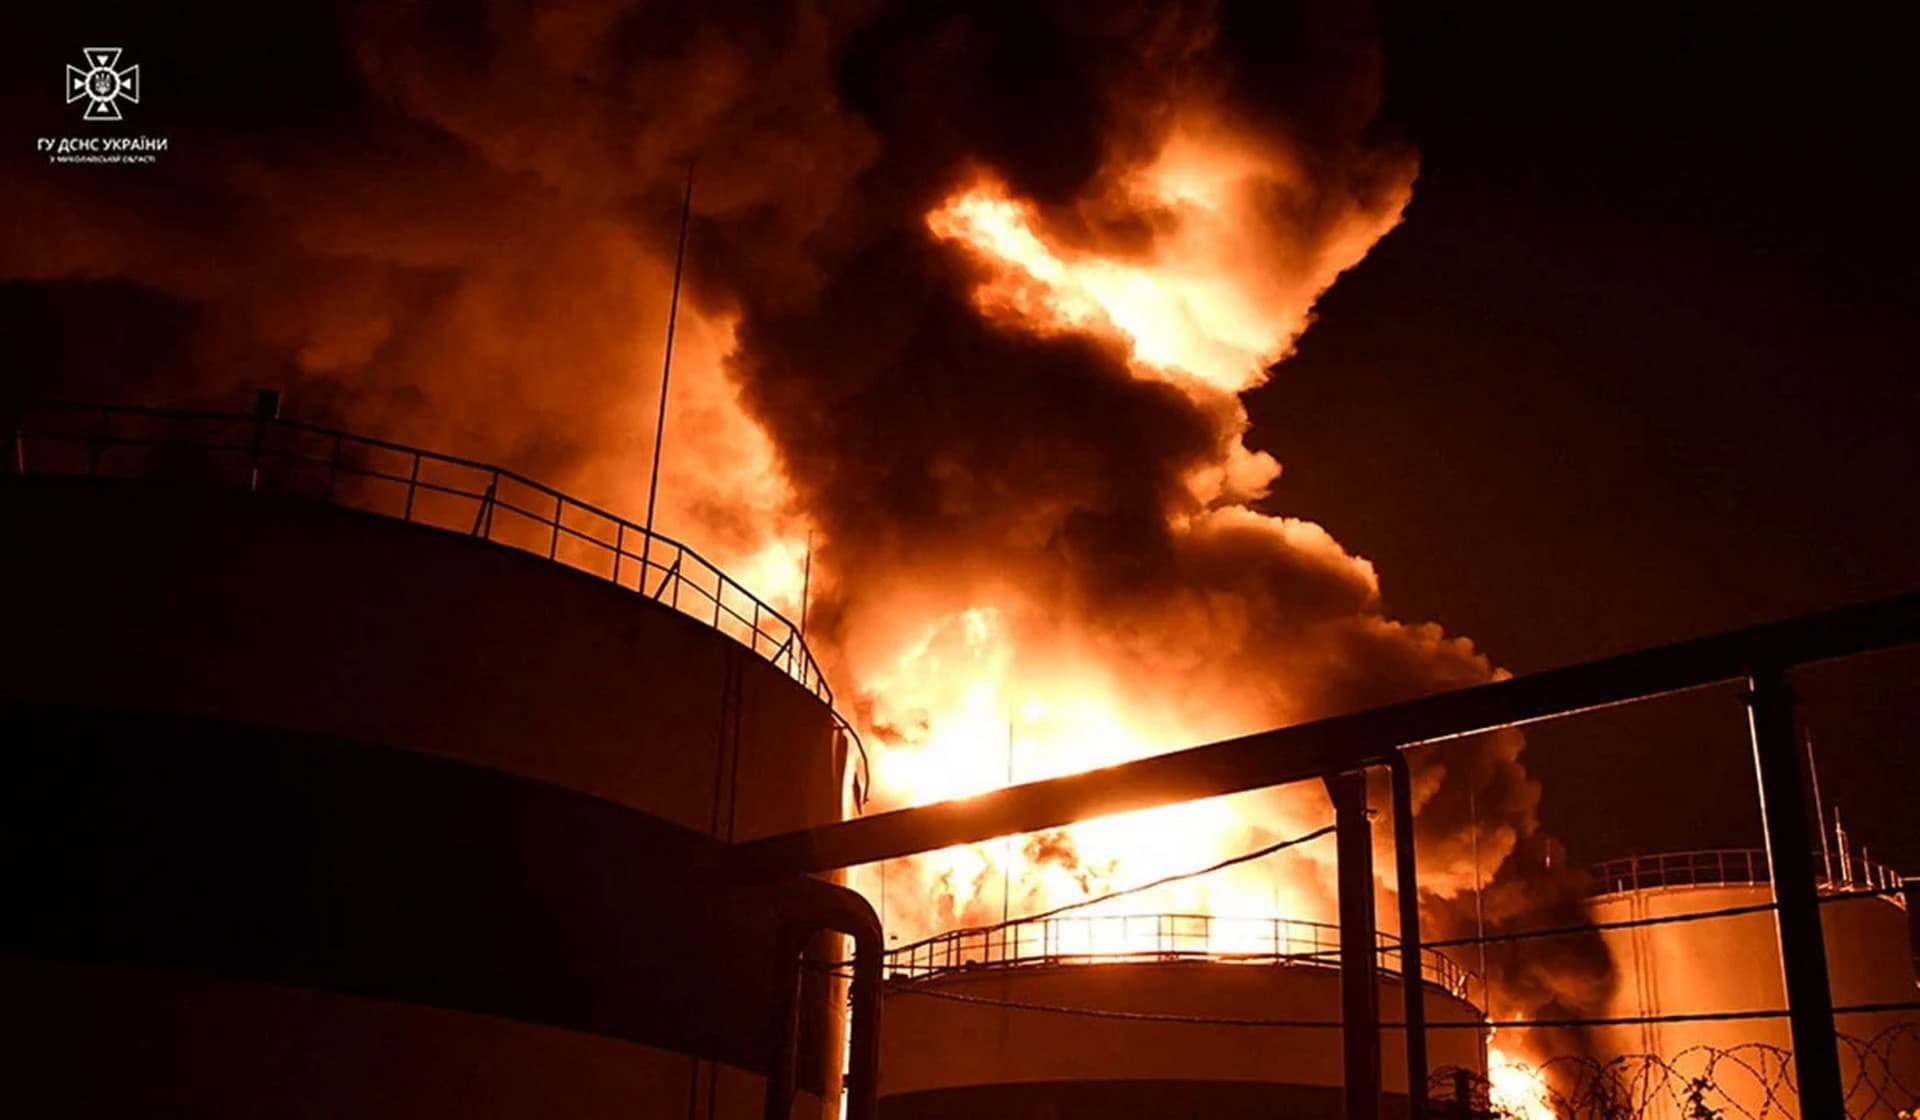 Sunflower oil storage tanks burn after strikes by Russian suicide drones in Mykolaiv